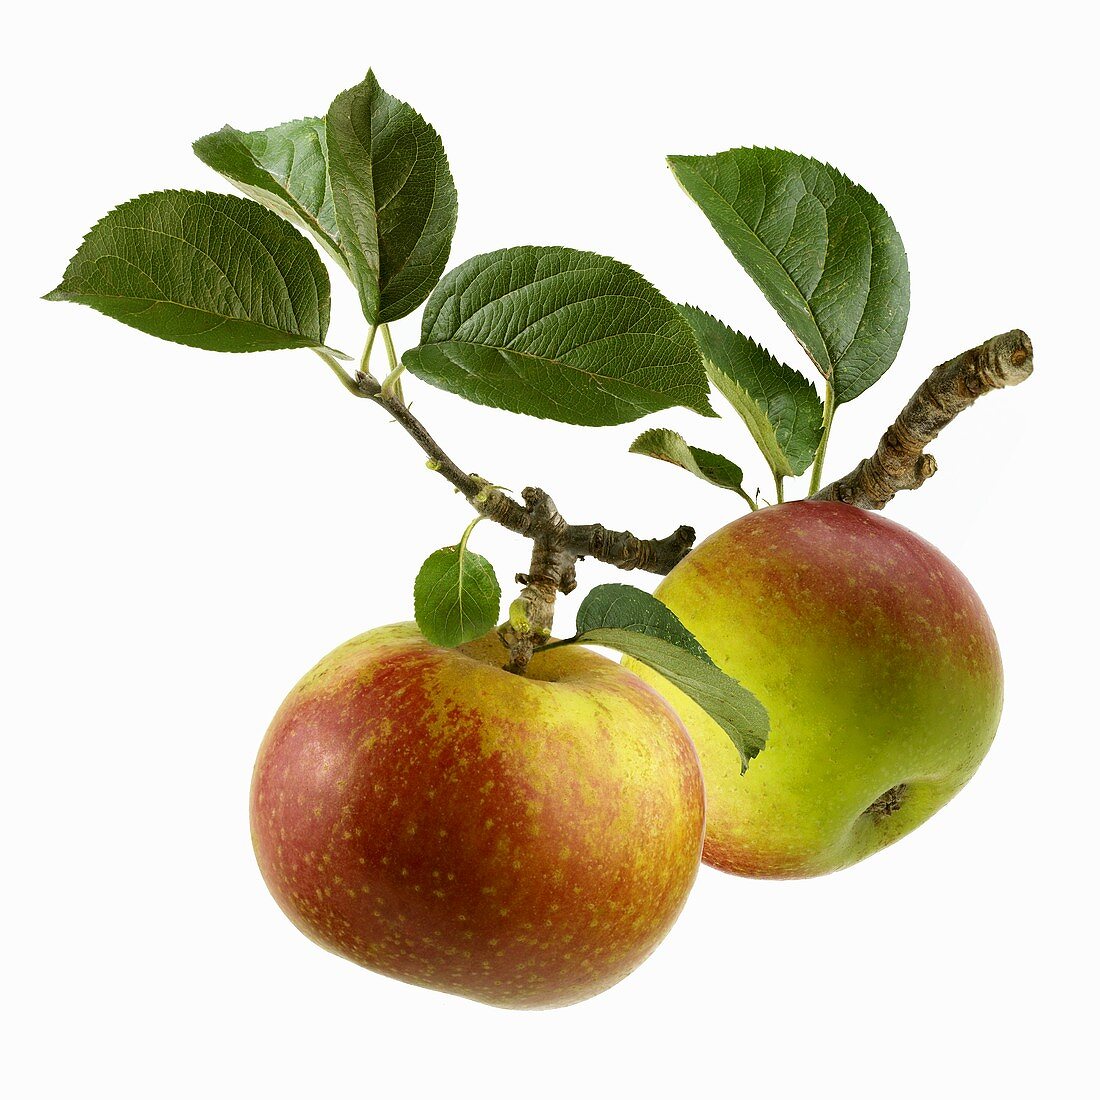 Two apples on branch